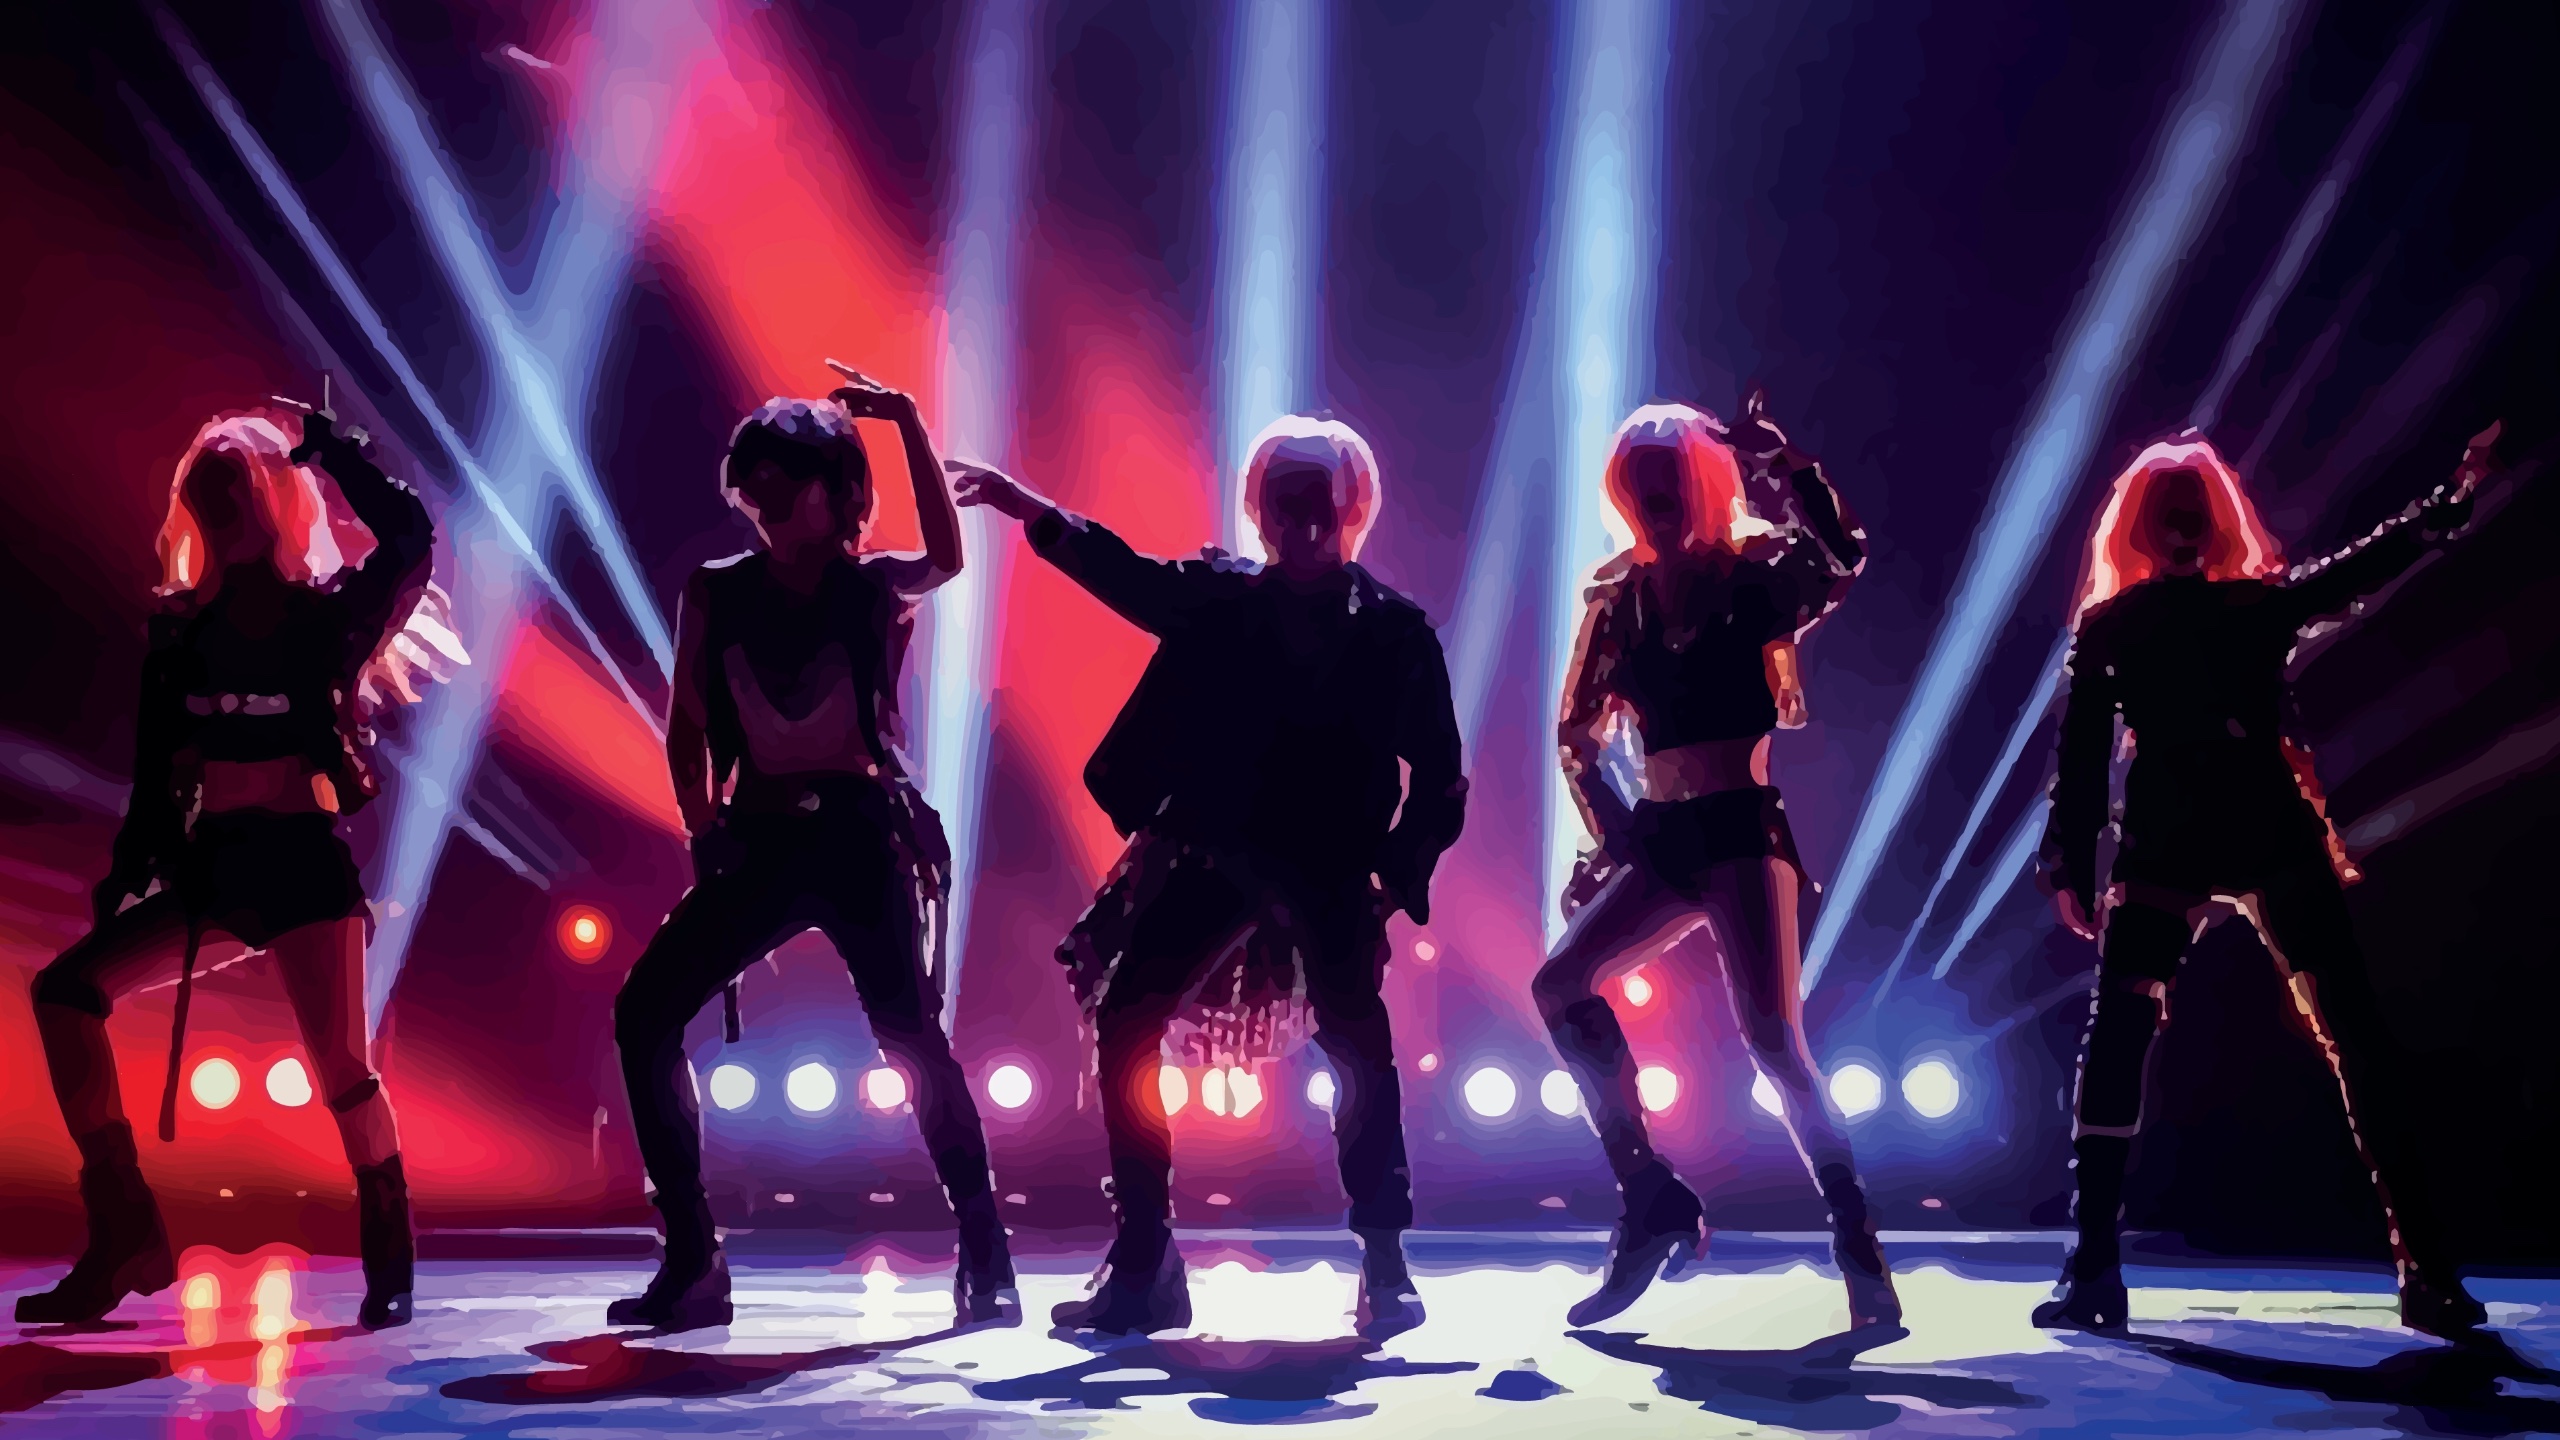 Only Autograph Remain Out of Reach, Says Virtual K-Pop Bands